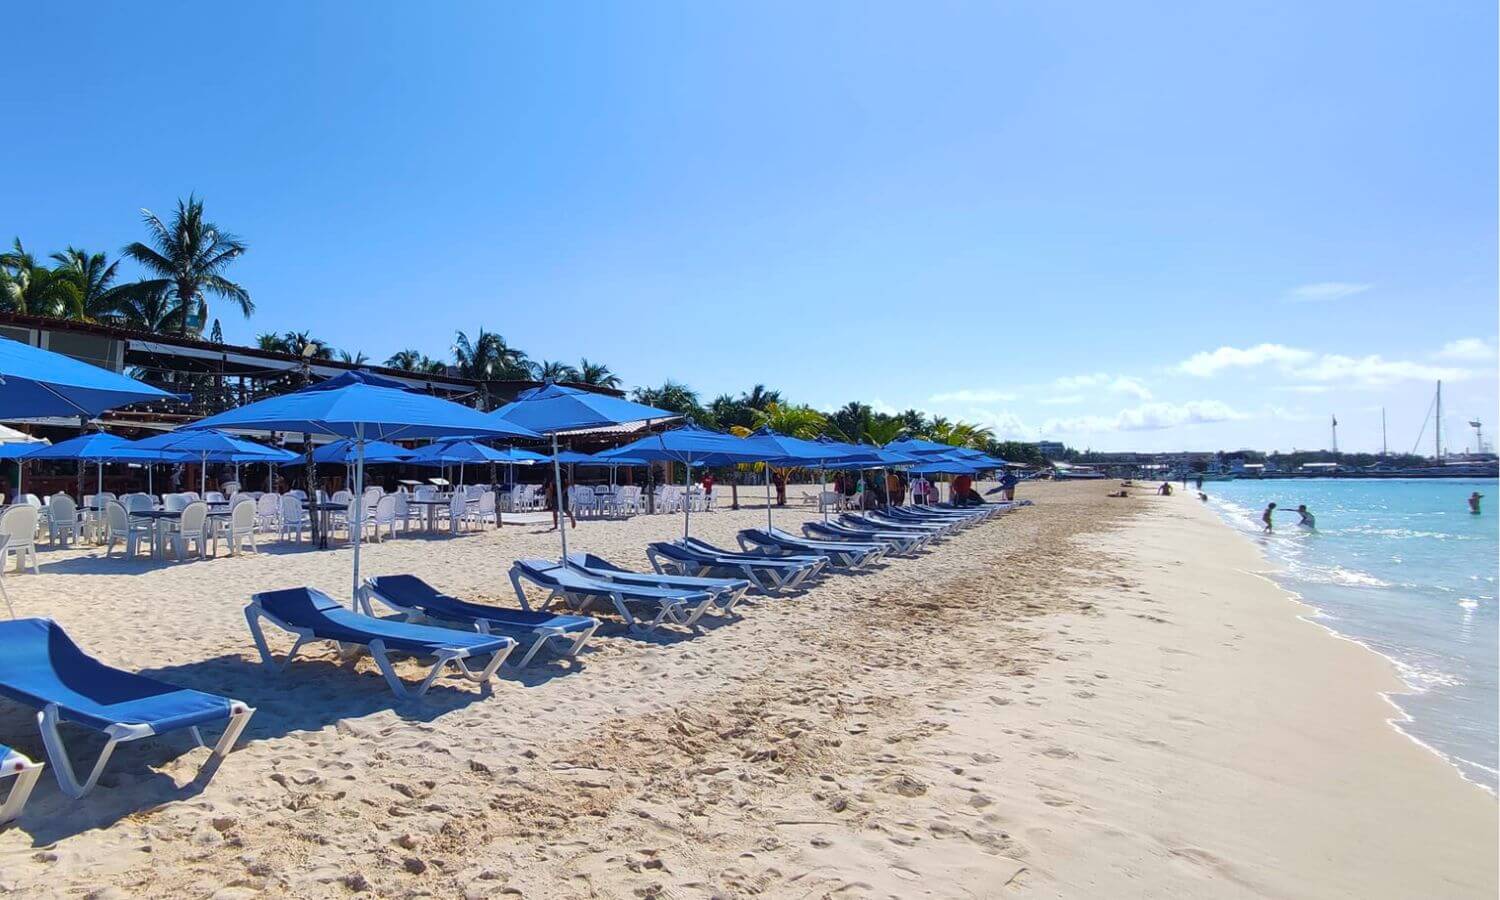 Sun loungers and umbrellas set up on a beach on Isla Mujeres ready for guests.